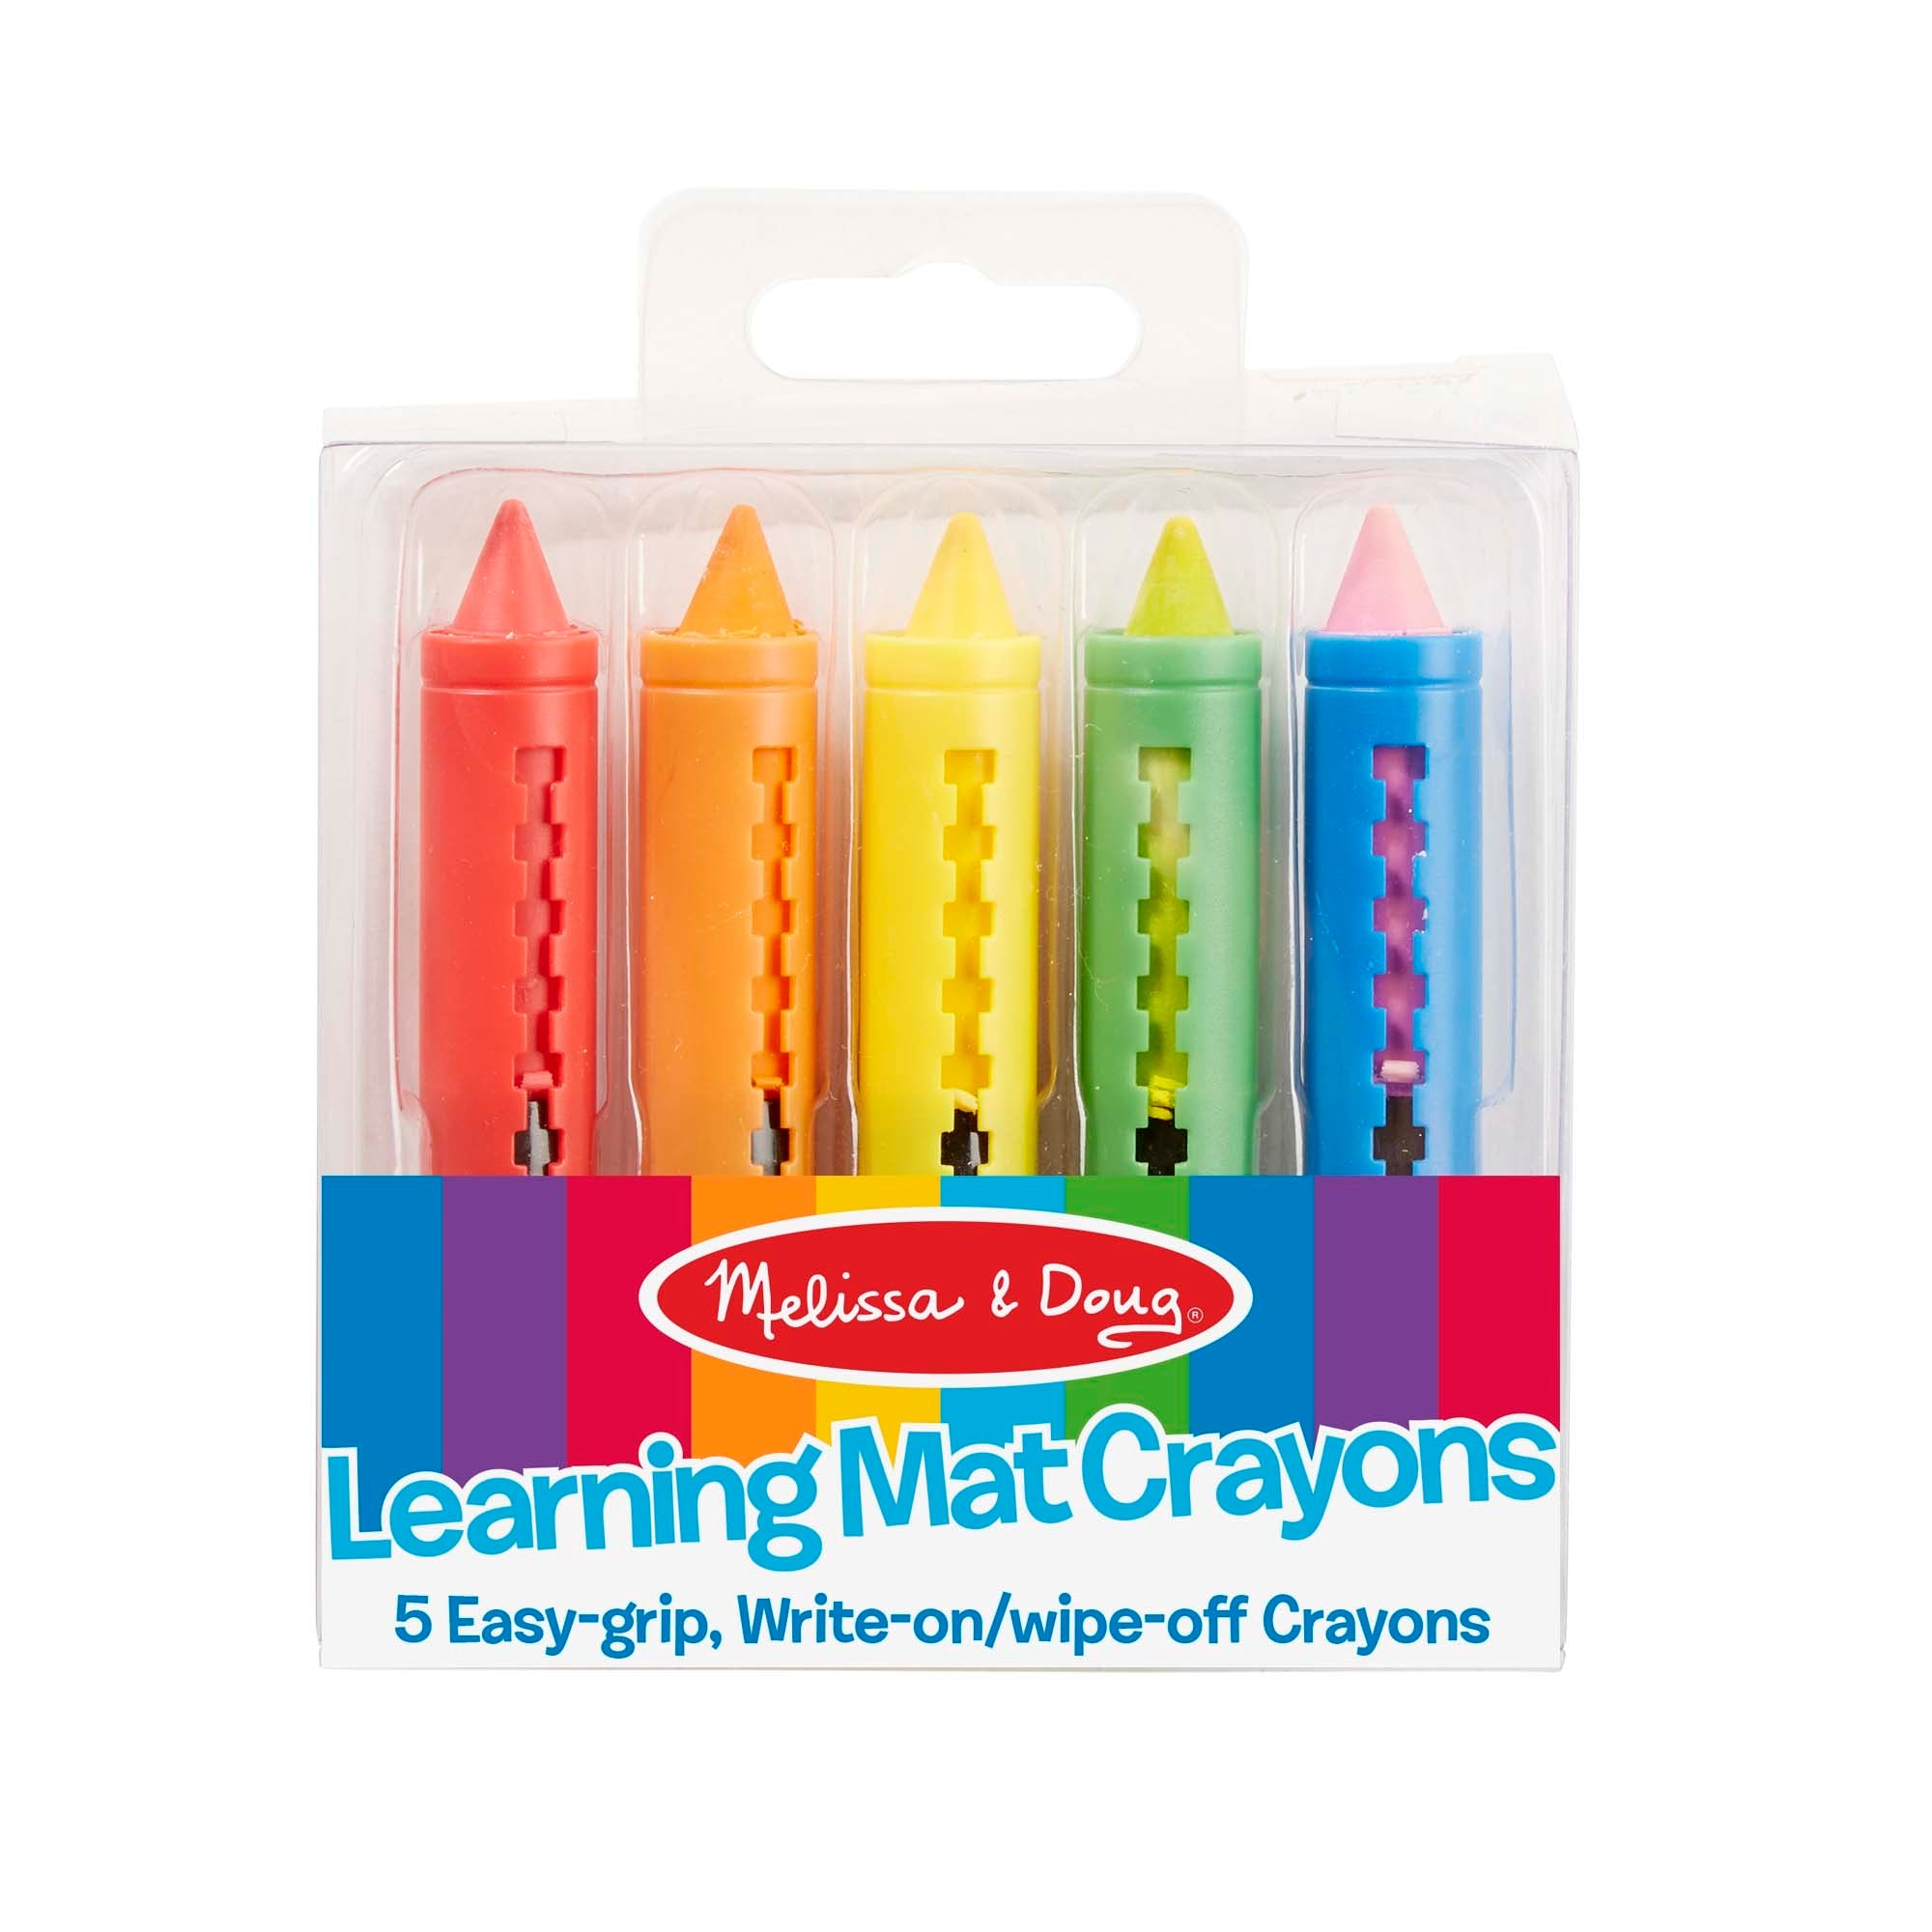 Melissa and Doug Learning Mat Crayons: What's Inside the Box